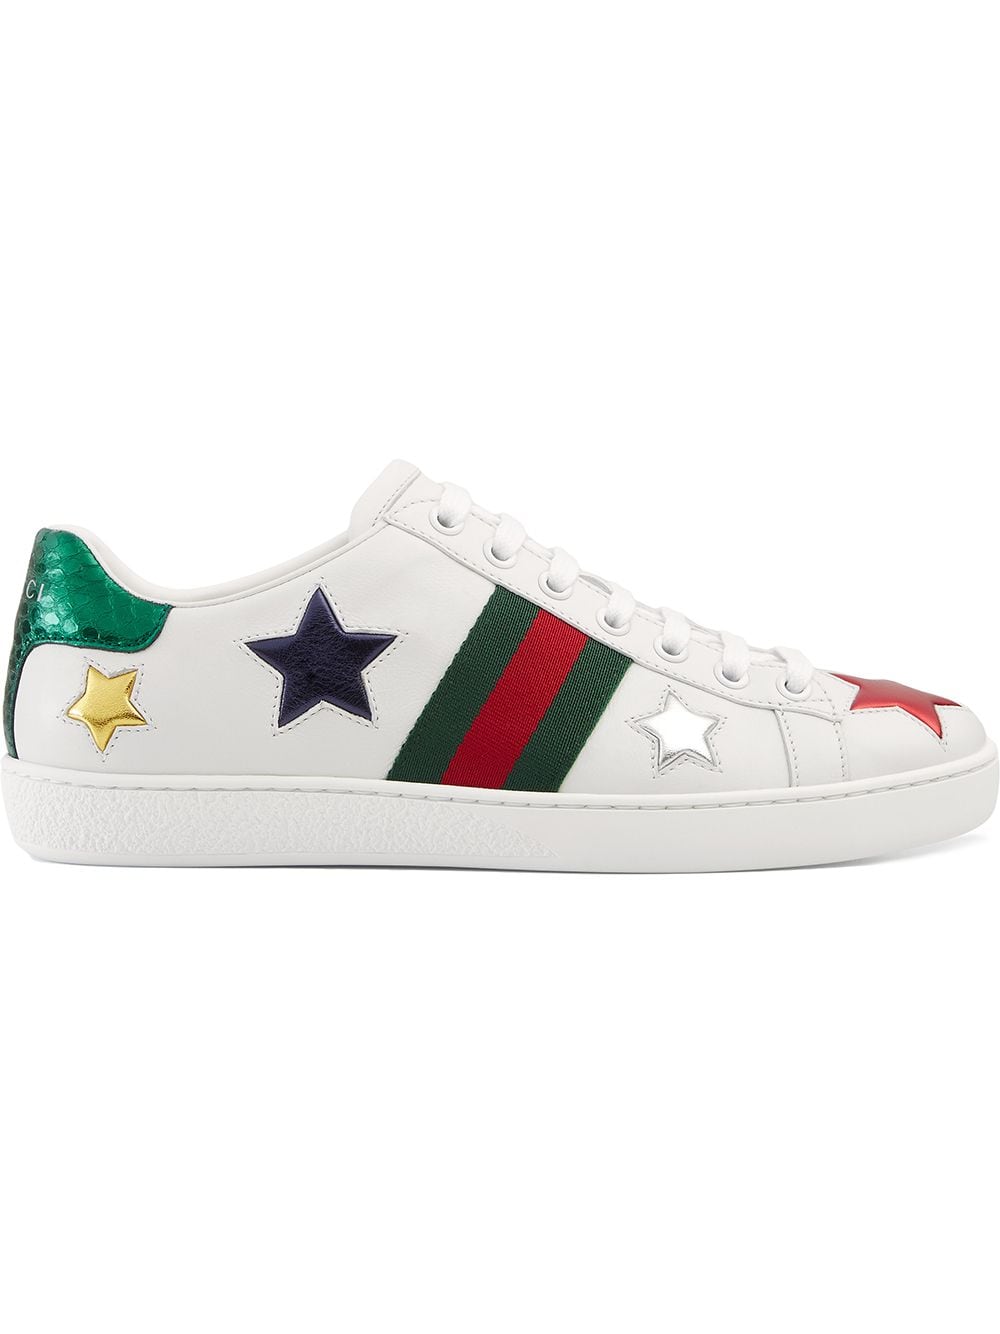 Gucci White Ace low-top Leather Sneakers - Farfetch